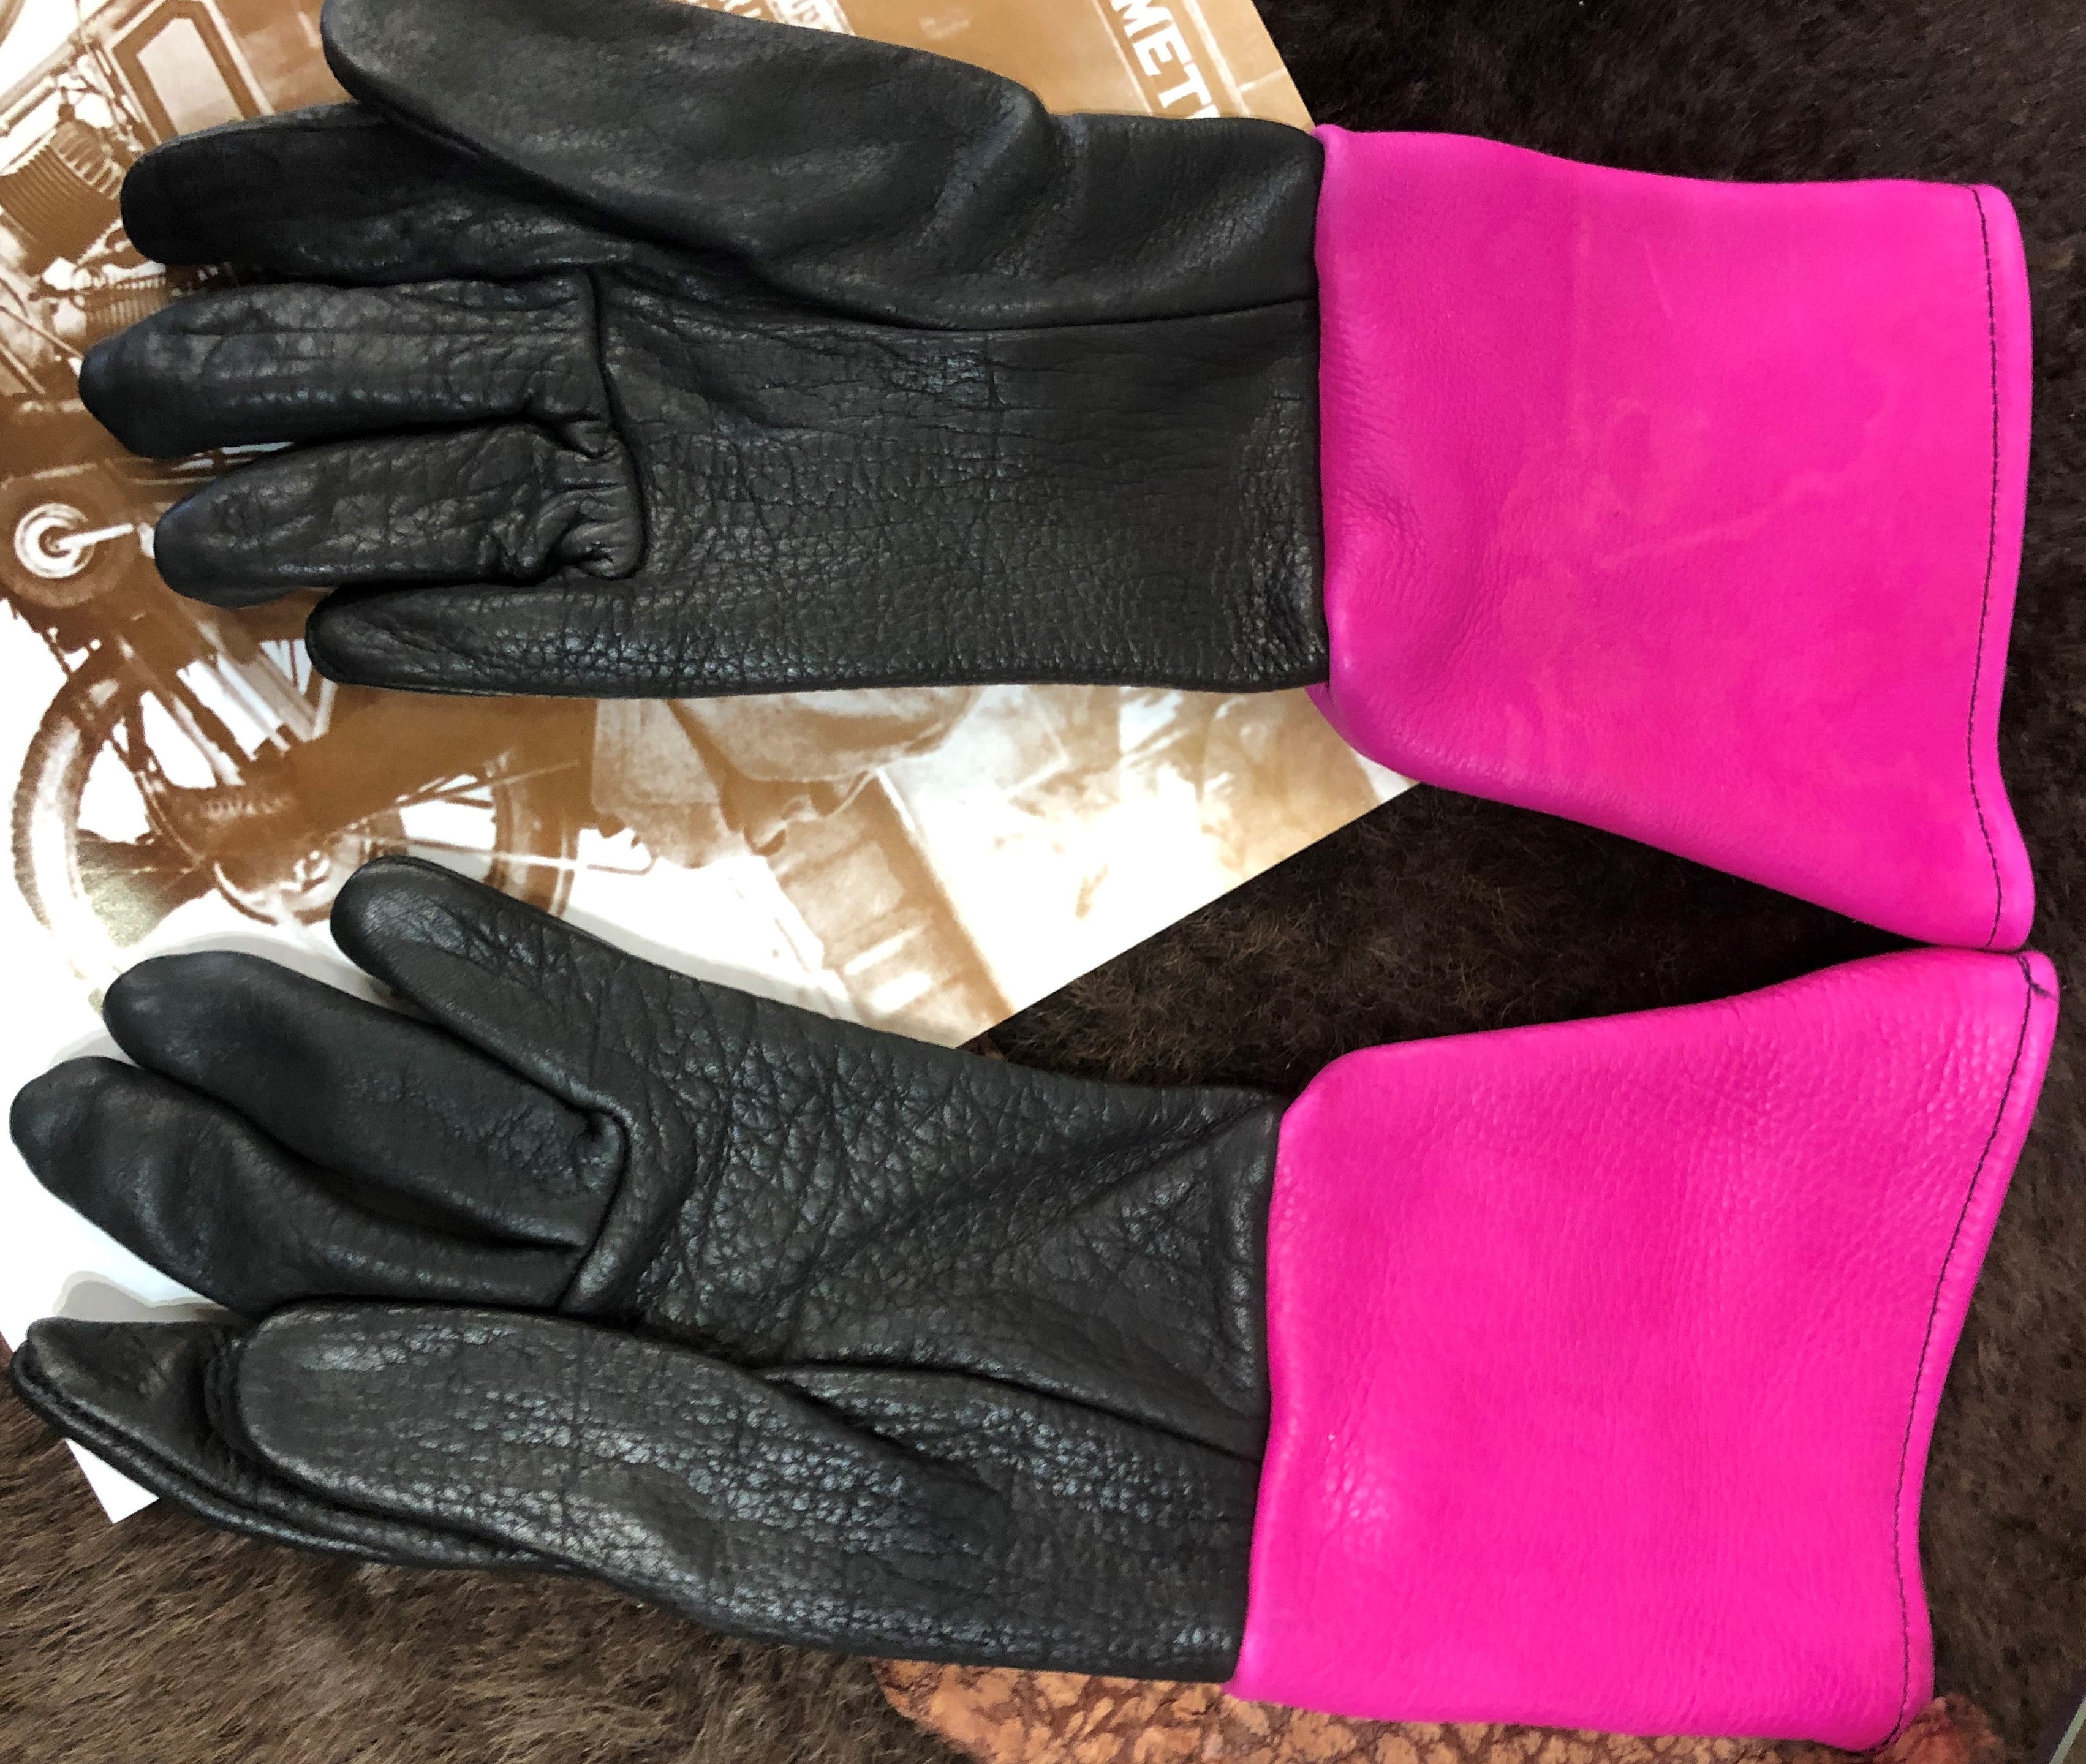 Buyce Leather - Ladies Long gauntlet bison leather riding/working glove